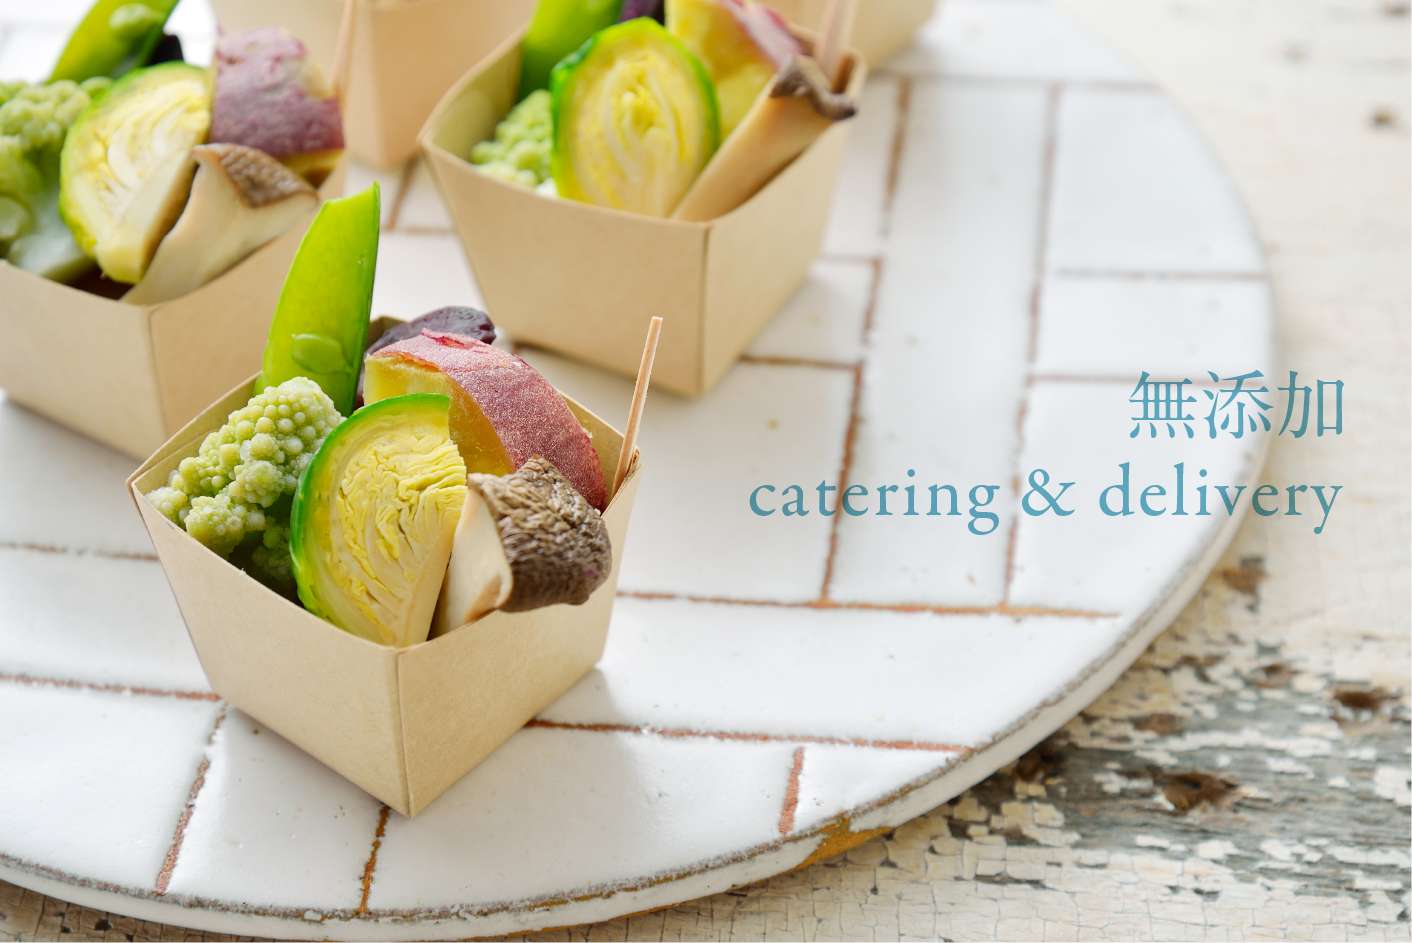 L'api catering ＆ delivery